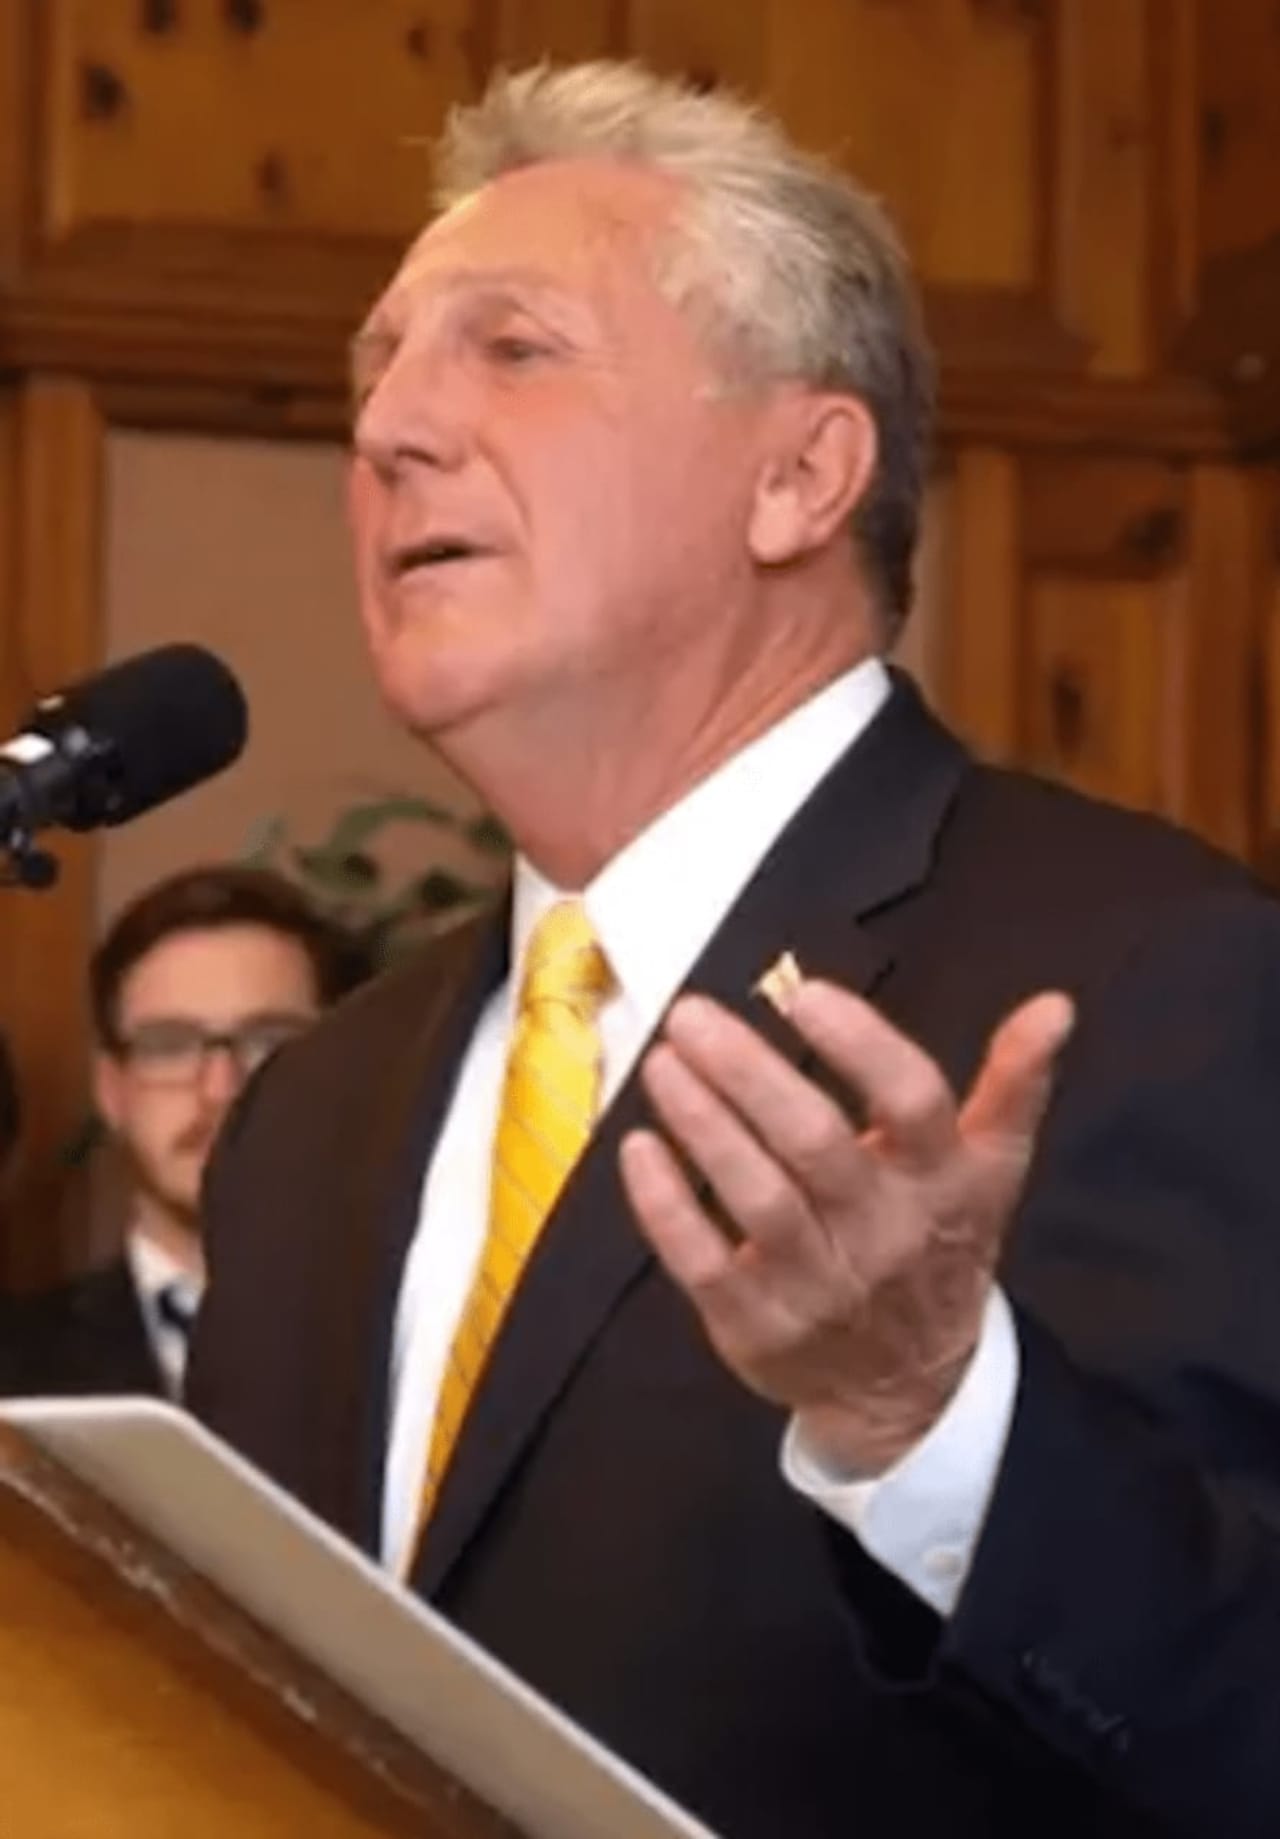 Norwalk Mayor Harry Rilling is among several scheduled to speak Thursday at a City Hall event aimed at connecting small business owners with locally available resources.